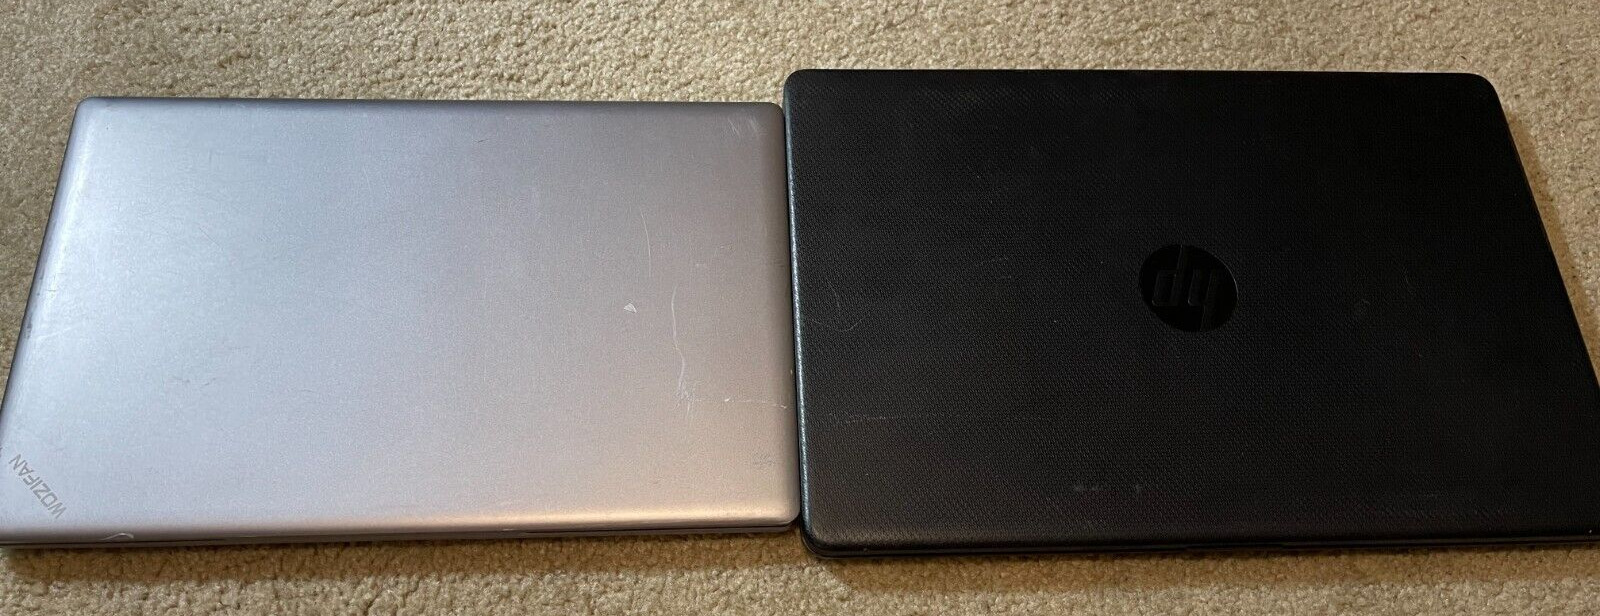 Lot of 2 laptops - 1x HP, 1x Misc, Untested As Is